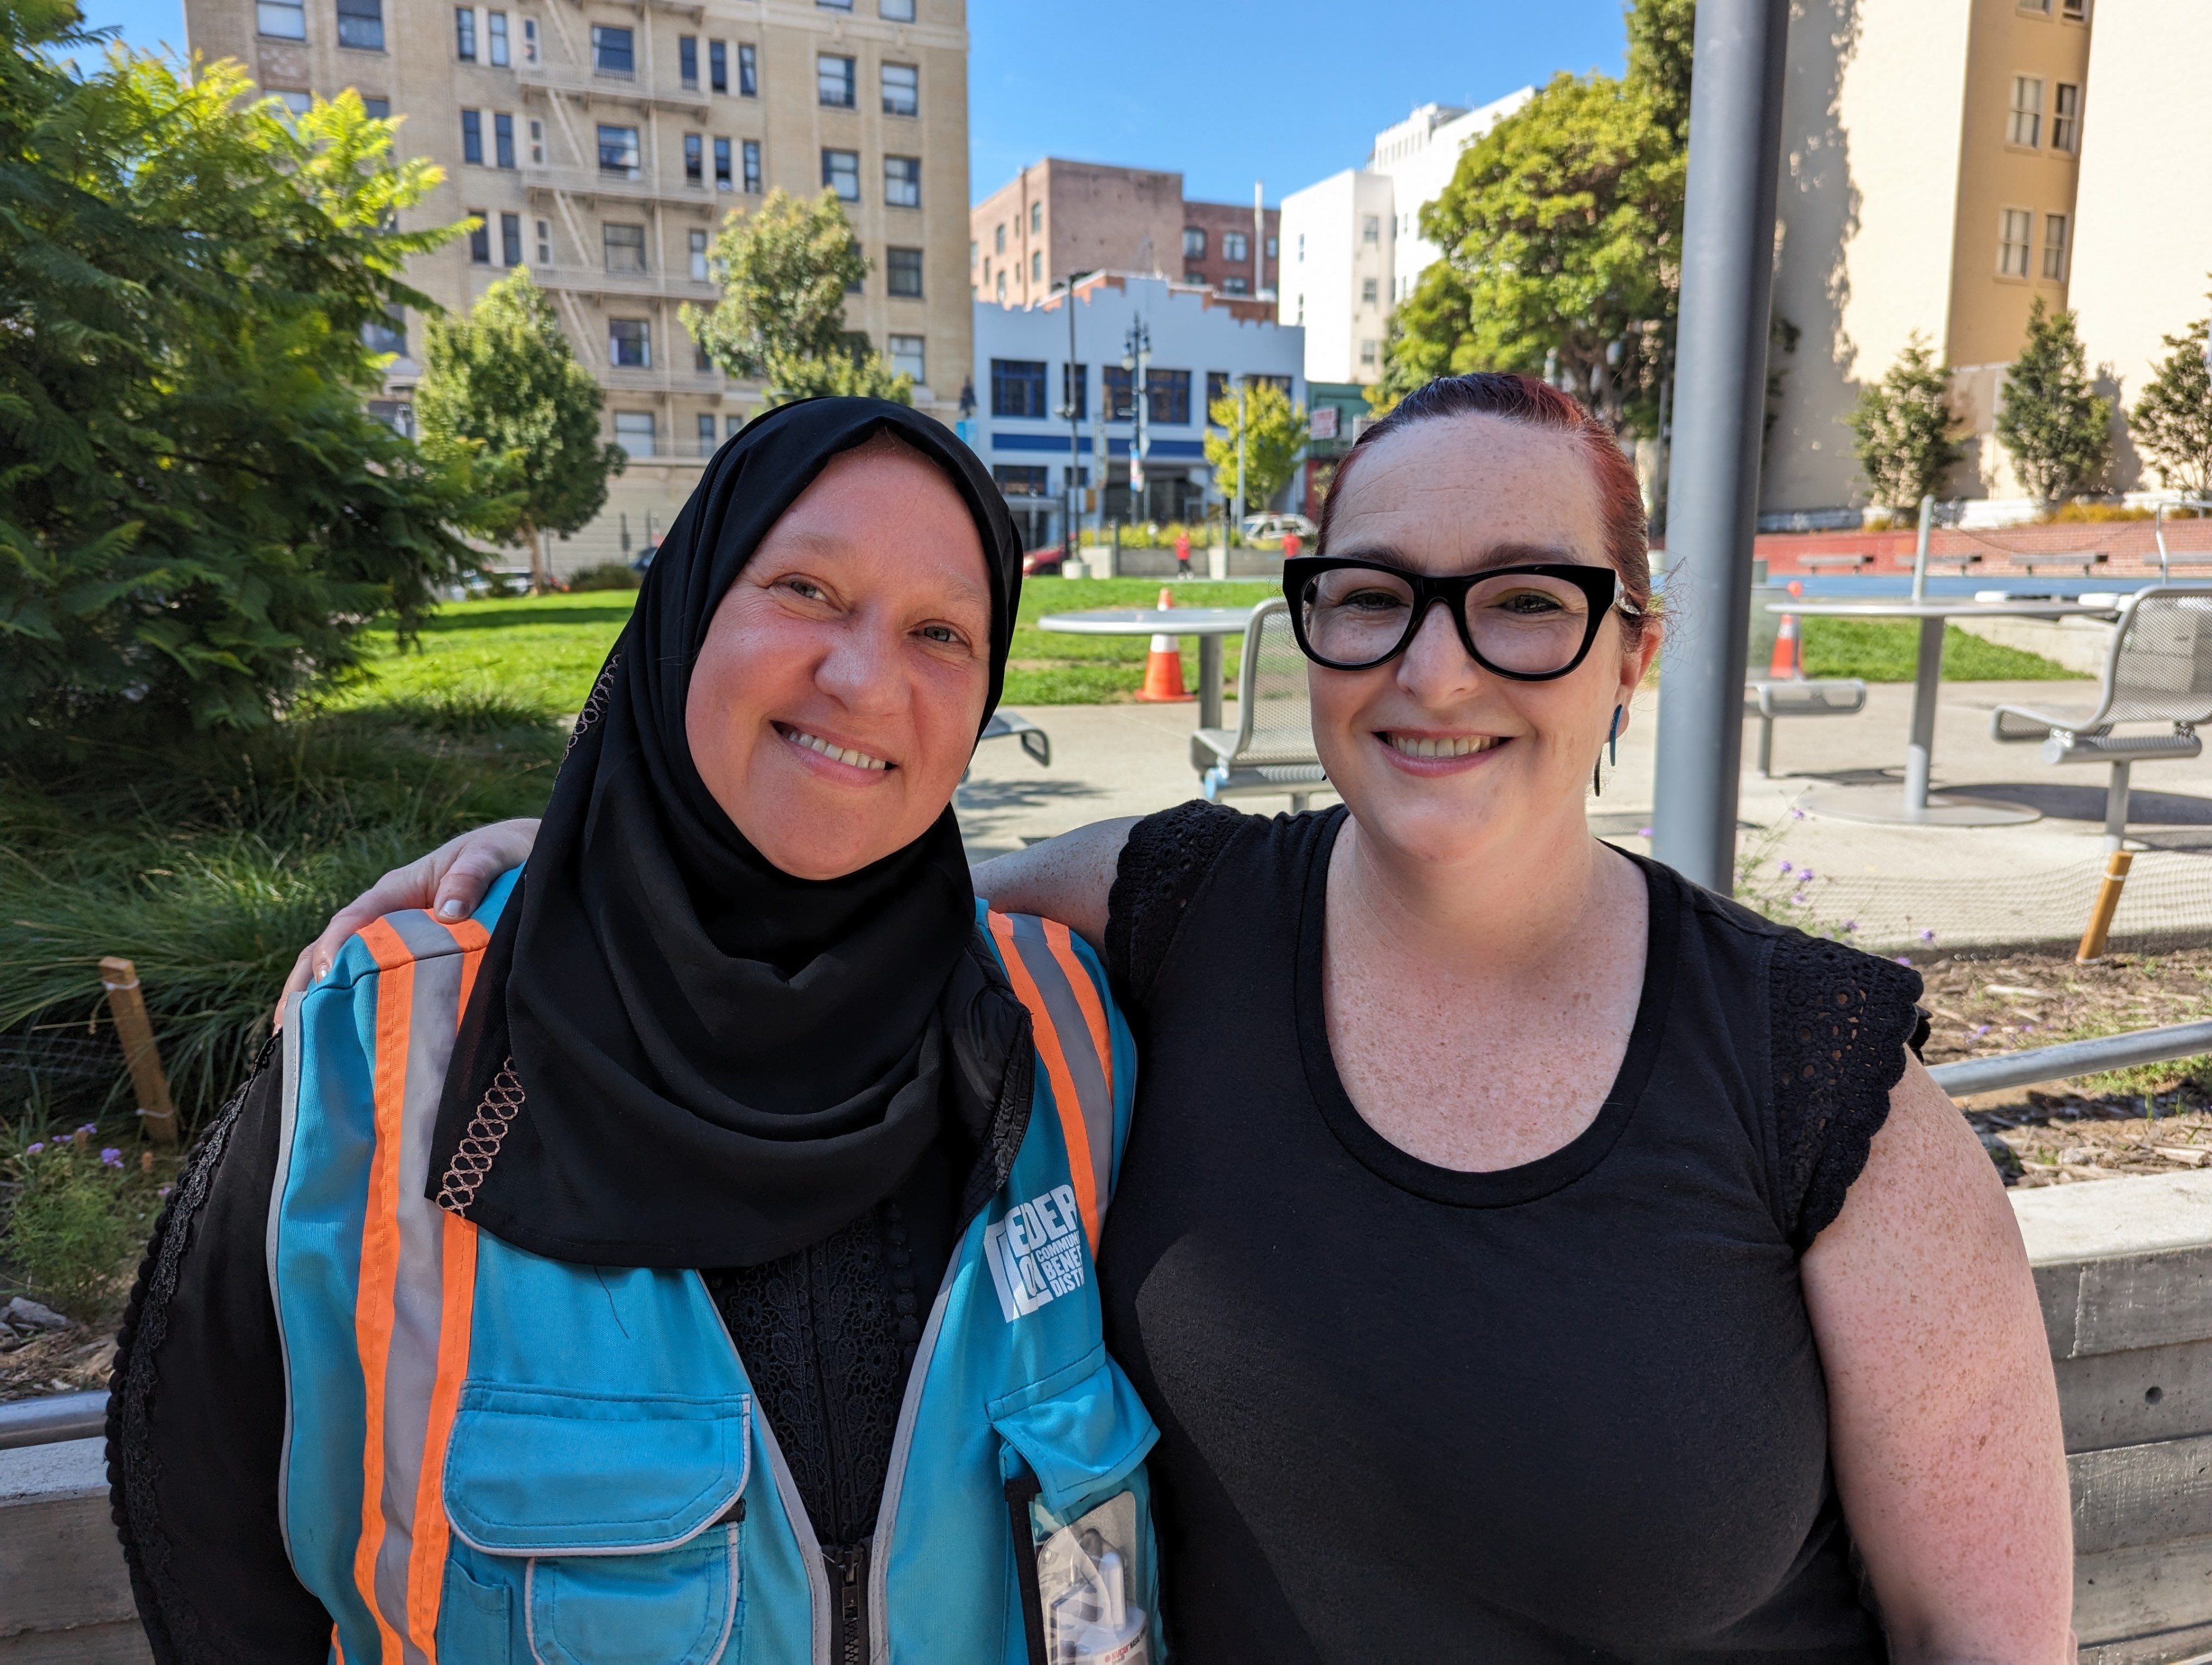 Tatiana Alabsi, program manager for Safe Passage, and Kate Robinson, executive director for the Tenderloin Community Benefit District, attend a community gathering at Boeddeker Park's clubhouse in the city's Tenderloin neighborhood Sunday.